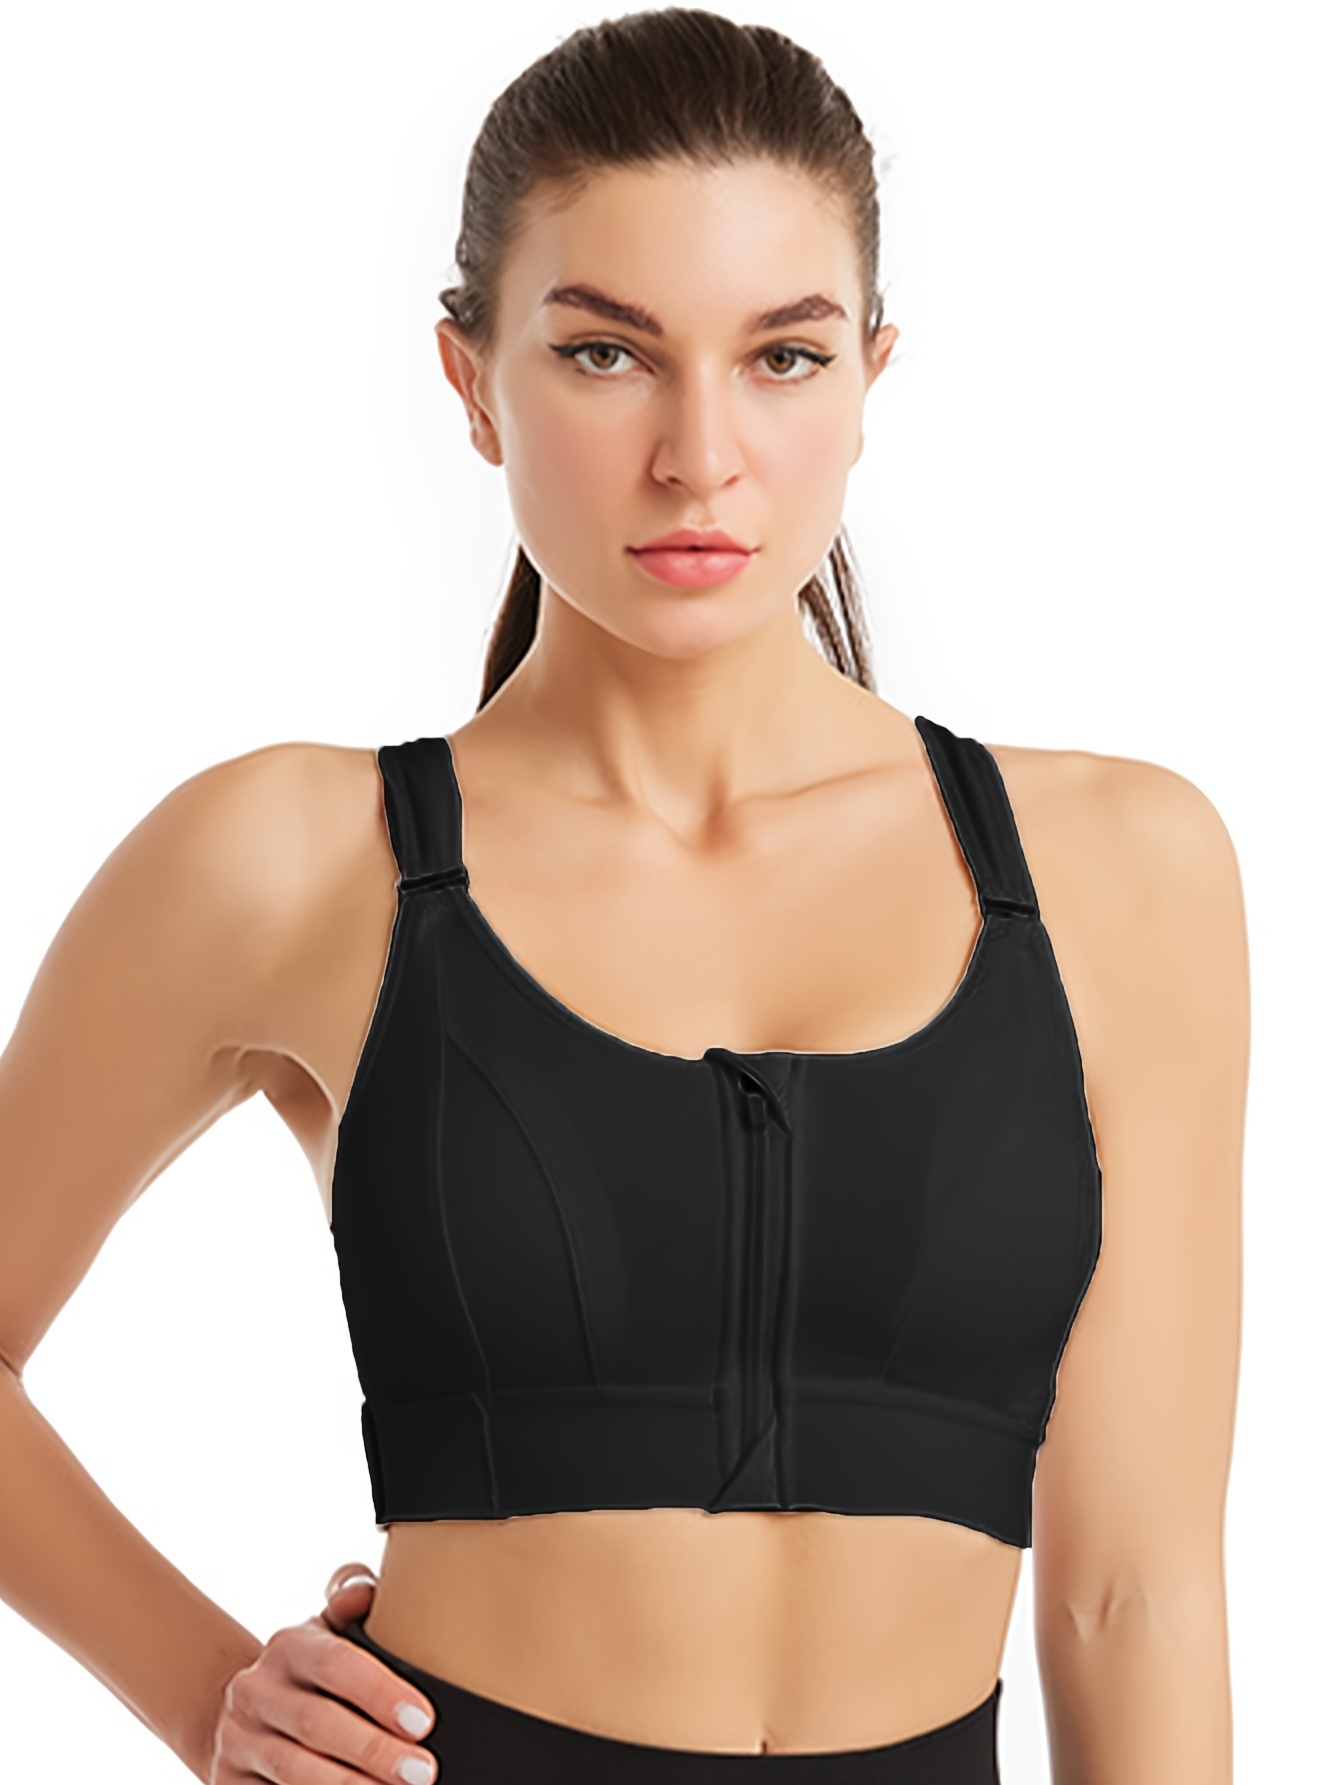 Adjustable Straps Compression Sports Bra, Black Stretchy Yoga Fitness  Cropped Tank Top, Women's Activewear